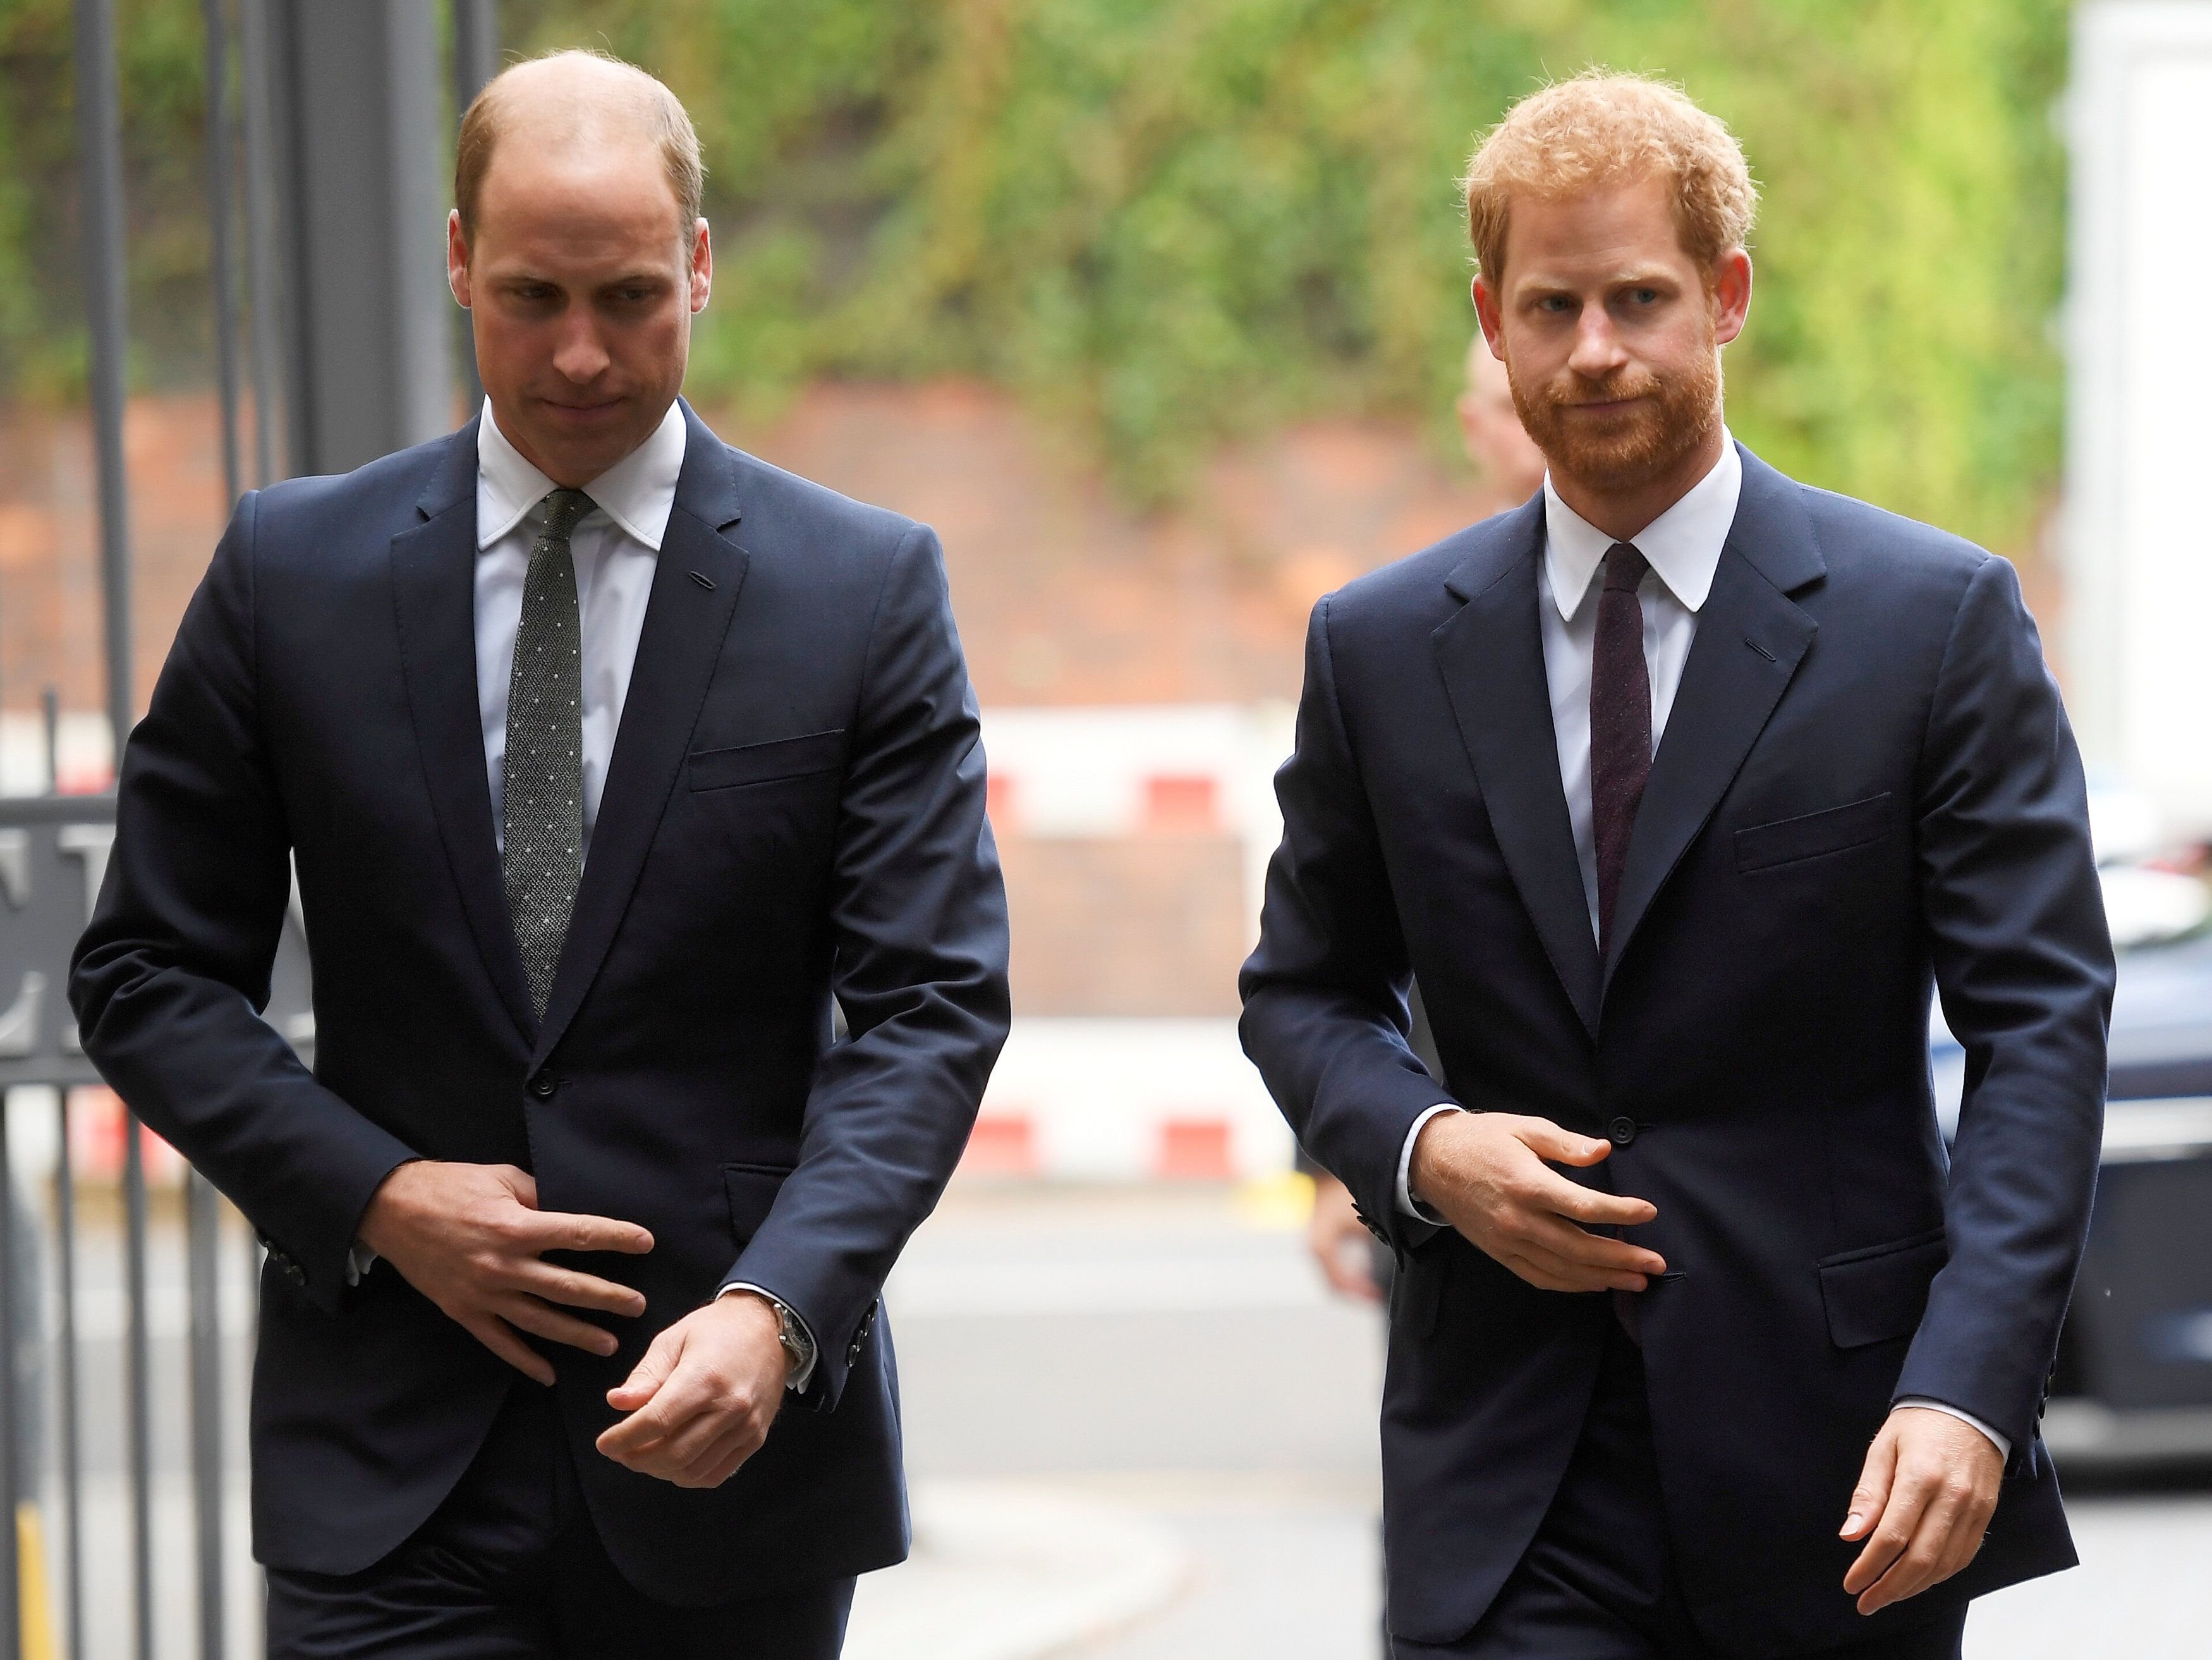 Prince William, Duke of Cambridge, with his younger brother Prince Harry during a visit to the newly established Royal Foundation Support4Grenfell community hub in London, England | Photo: Toby Melville - WPA Pool / Getty Images